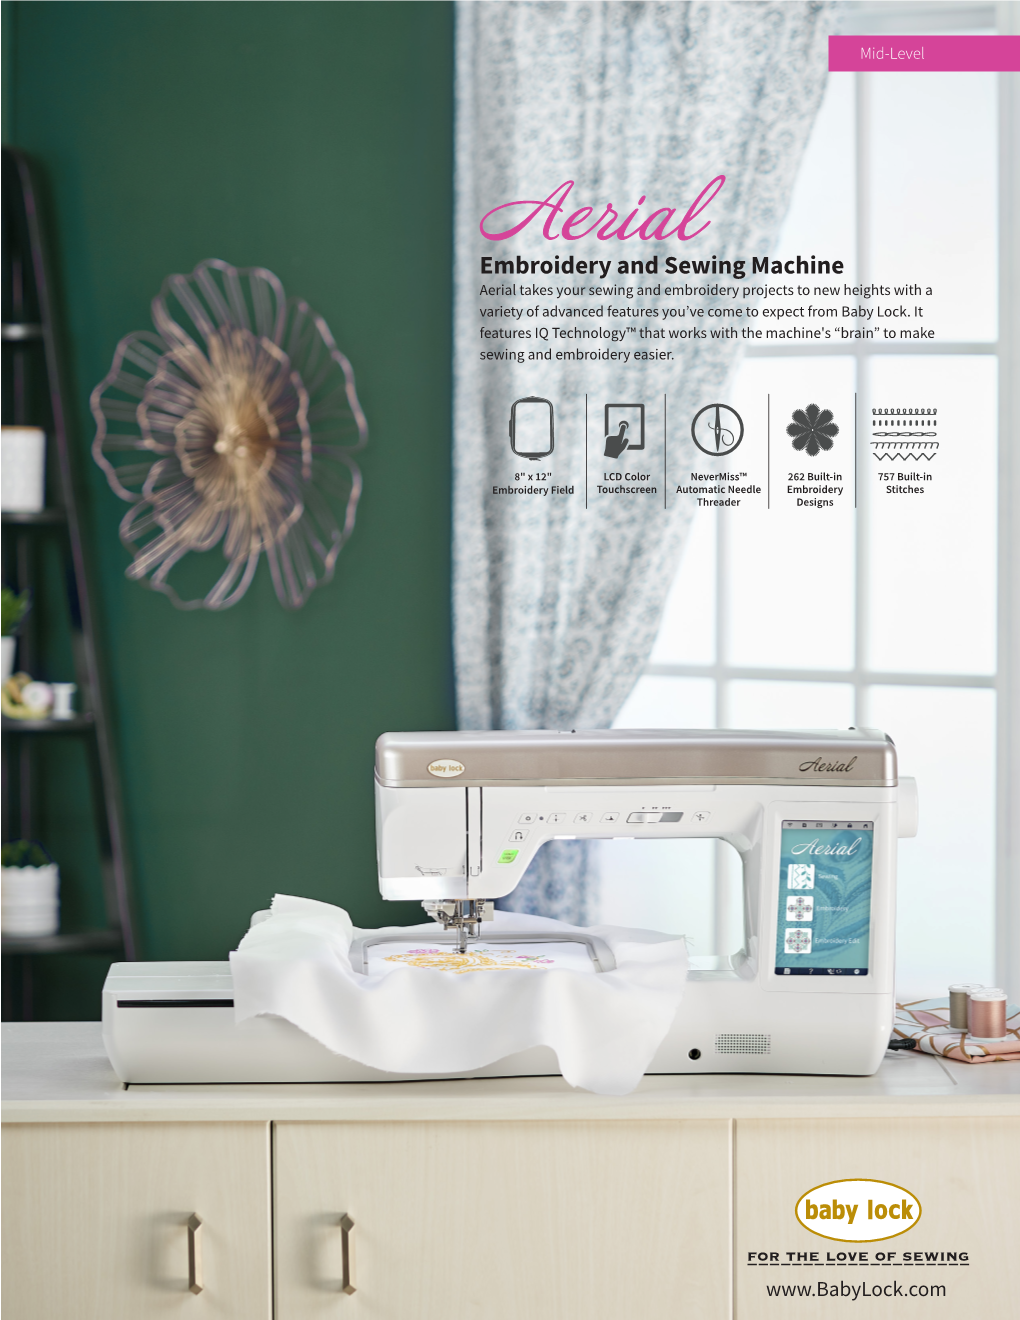 Embroidery and Sewing Machine Aerial Takes Your Sewing and Embroidery Projects to New Heights with a Variety of Advanced Features You’Ve Come to Expect from Baby Lock